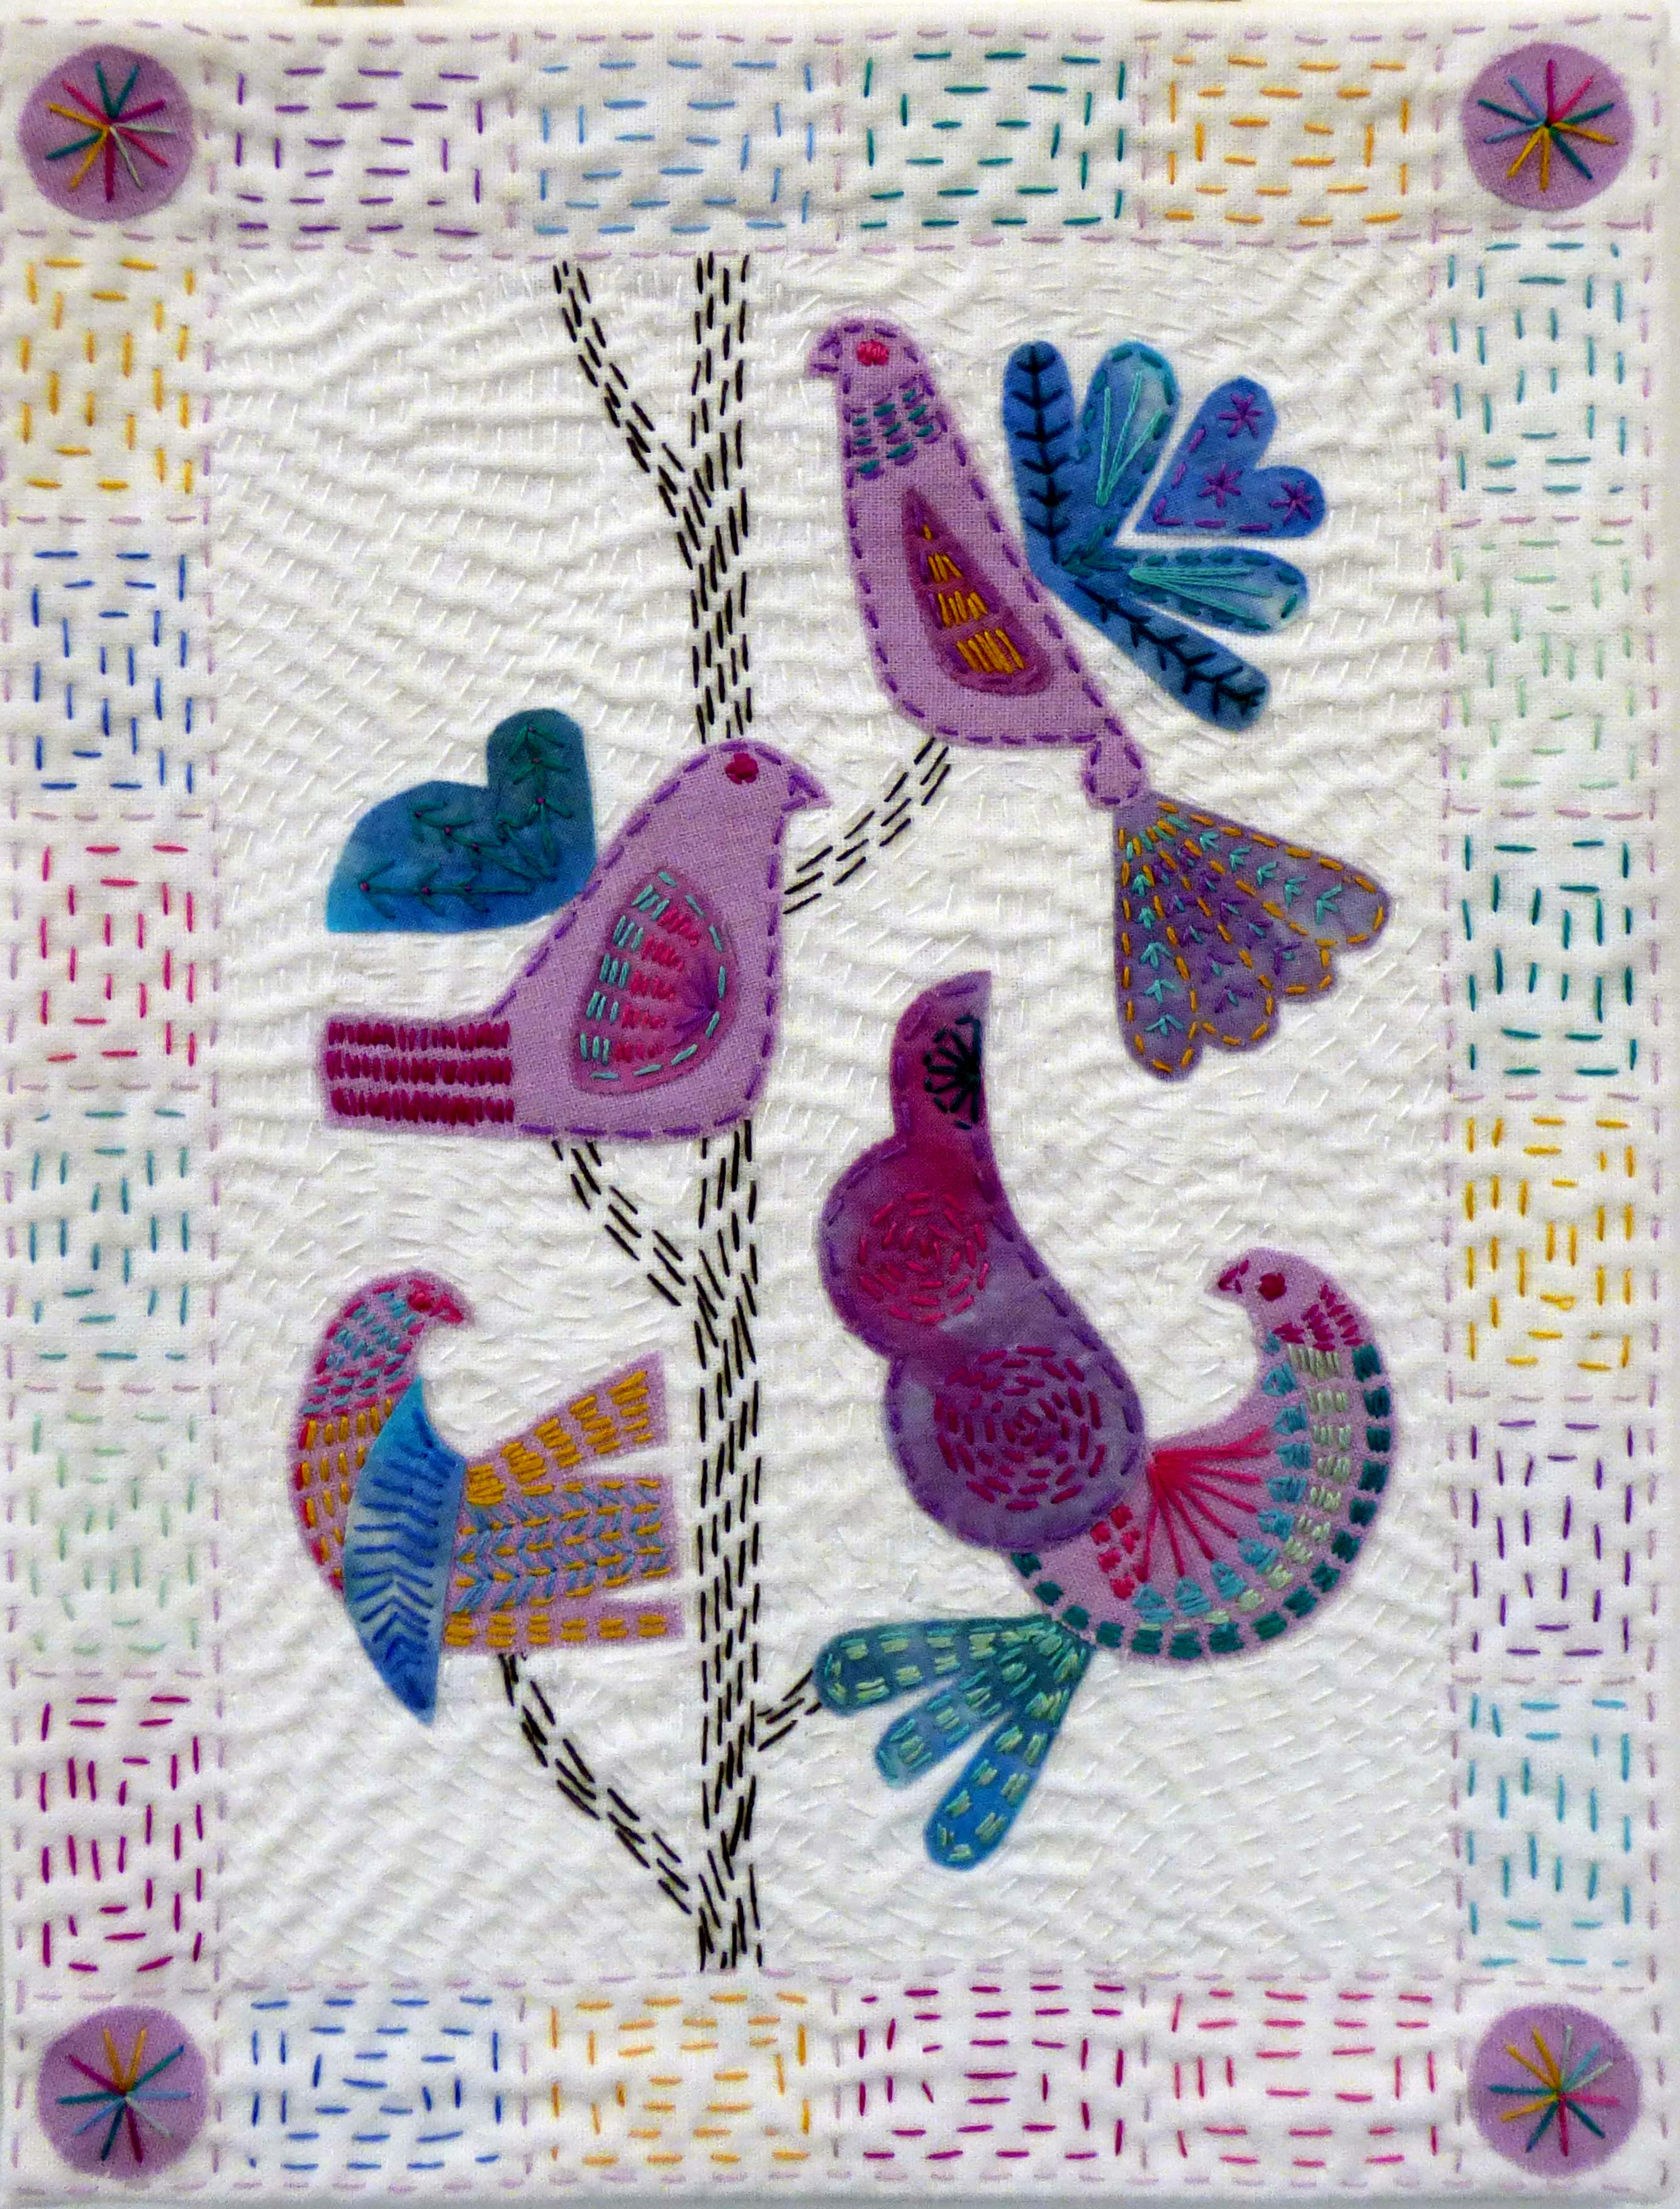 PIGEONS AND SONGBIRDS by Jane Holmes, Natural Progression Group, July 2021